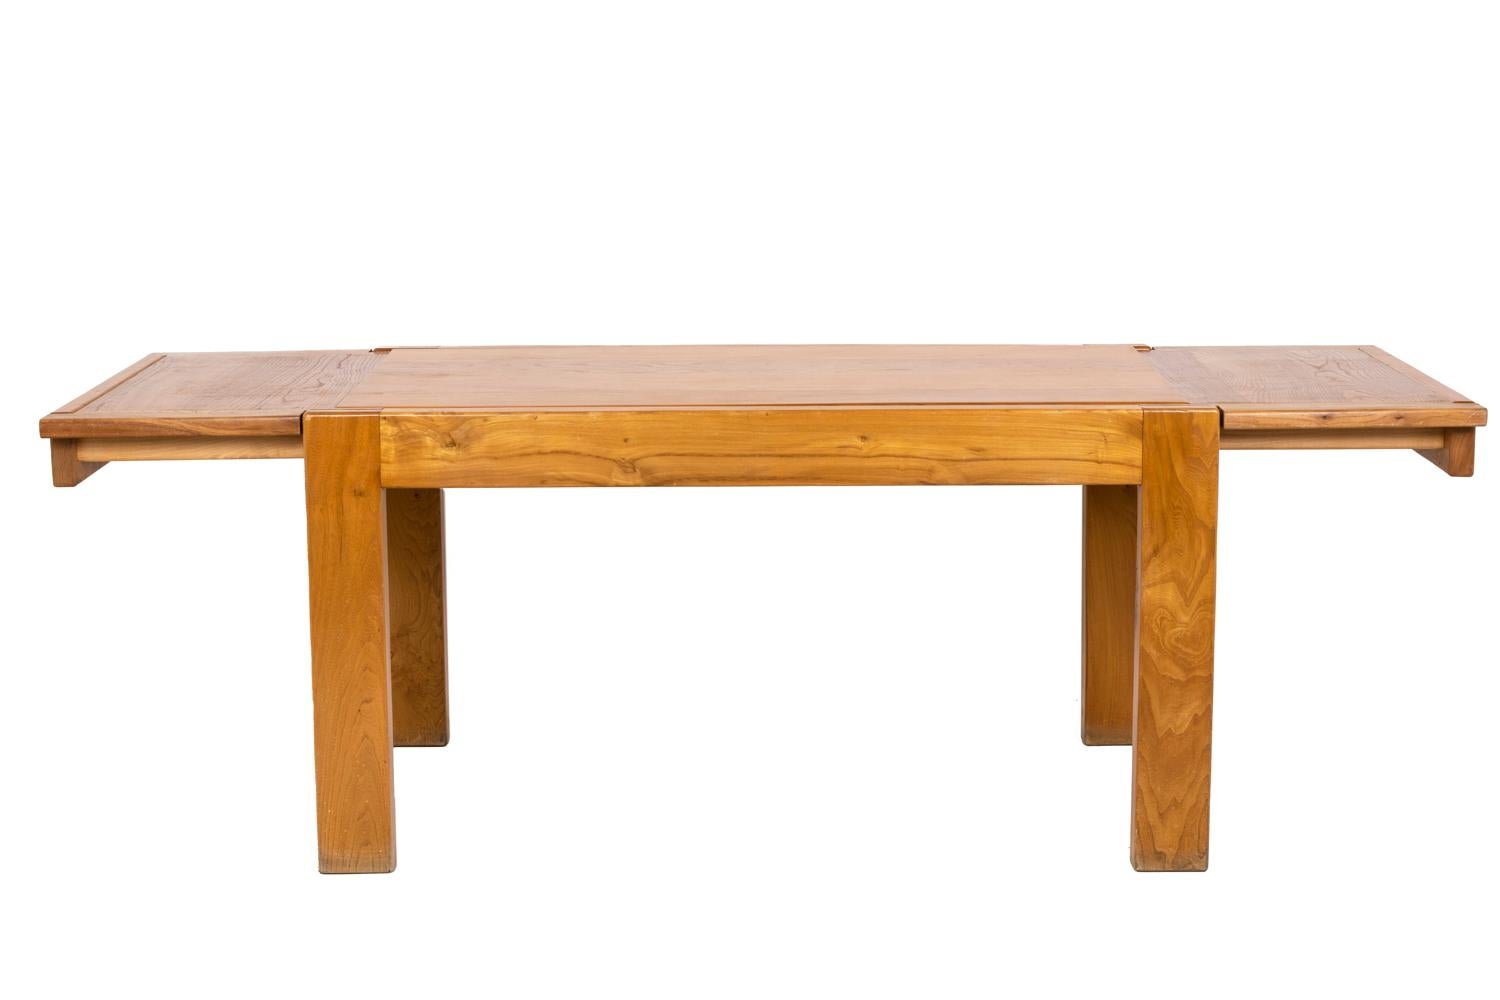 Maison Regain, attributed to.

Rectangular-shaped dinning table in blond elm composed by four rectangular cross-section feet linked by four high sleppers including two small removable ones allowding the installation of extensions. The elm pannel